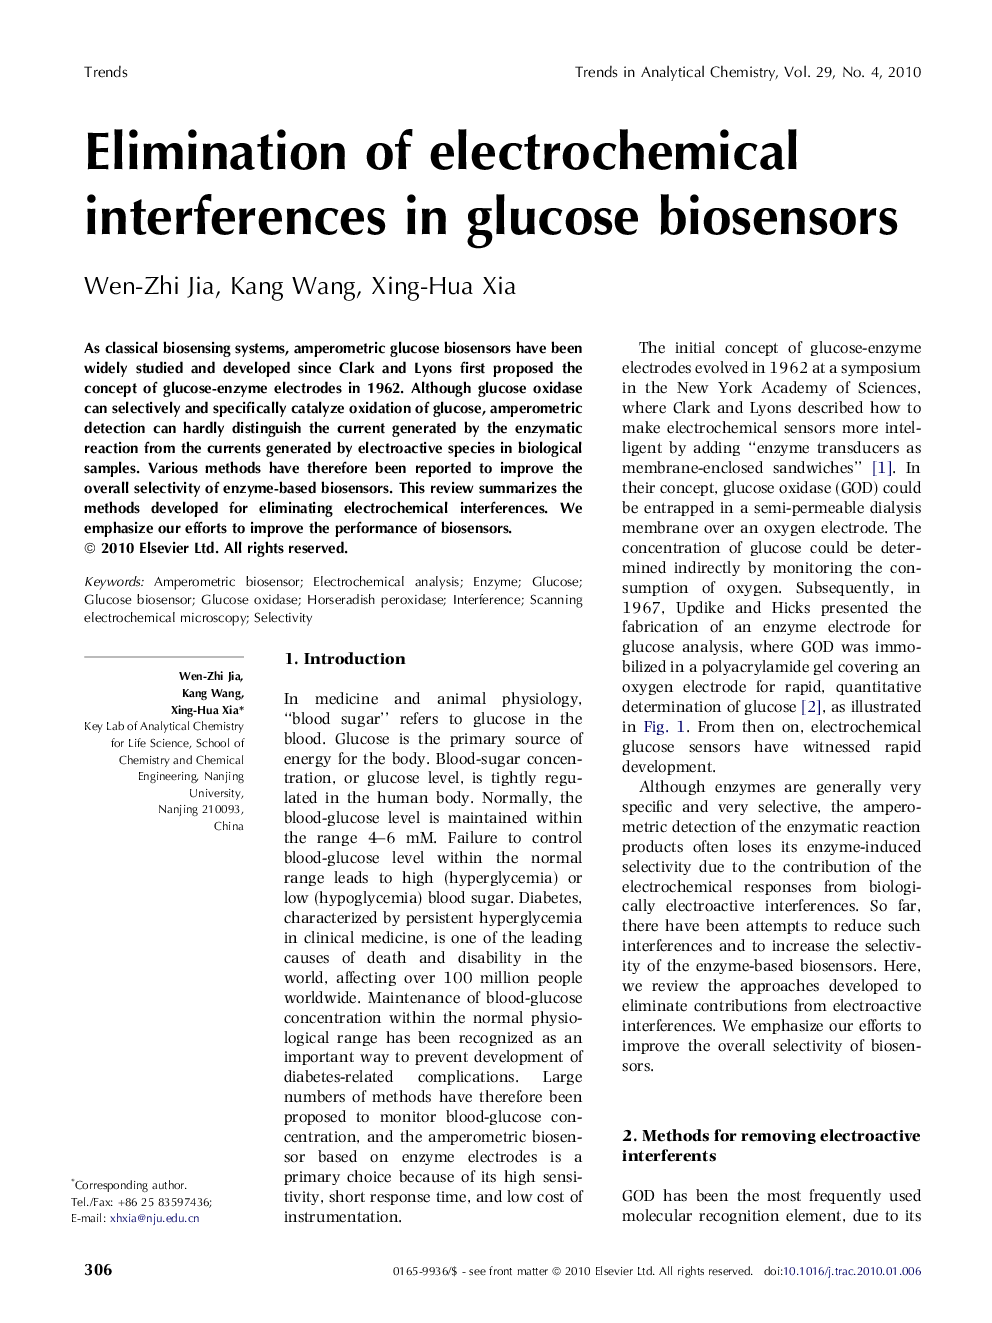 Elimination of electrochemical interferences in glucose biosensors